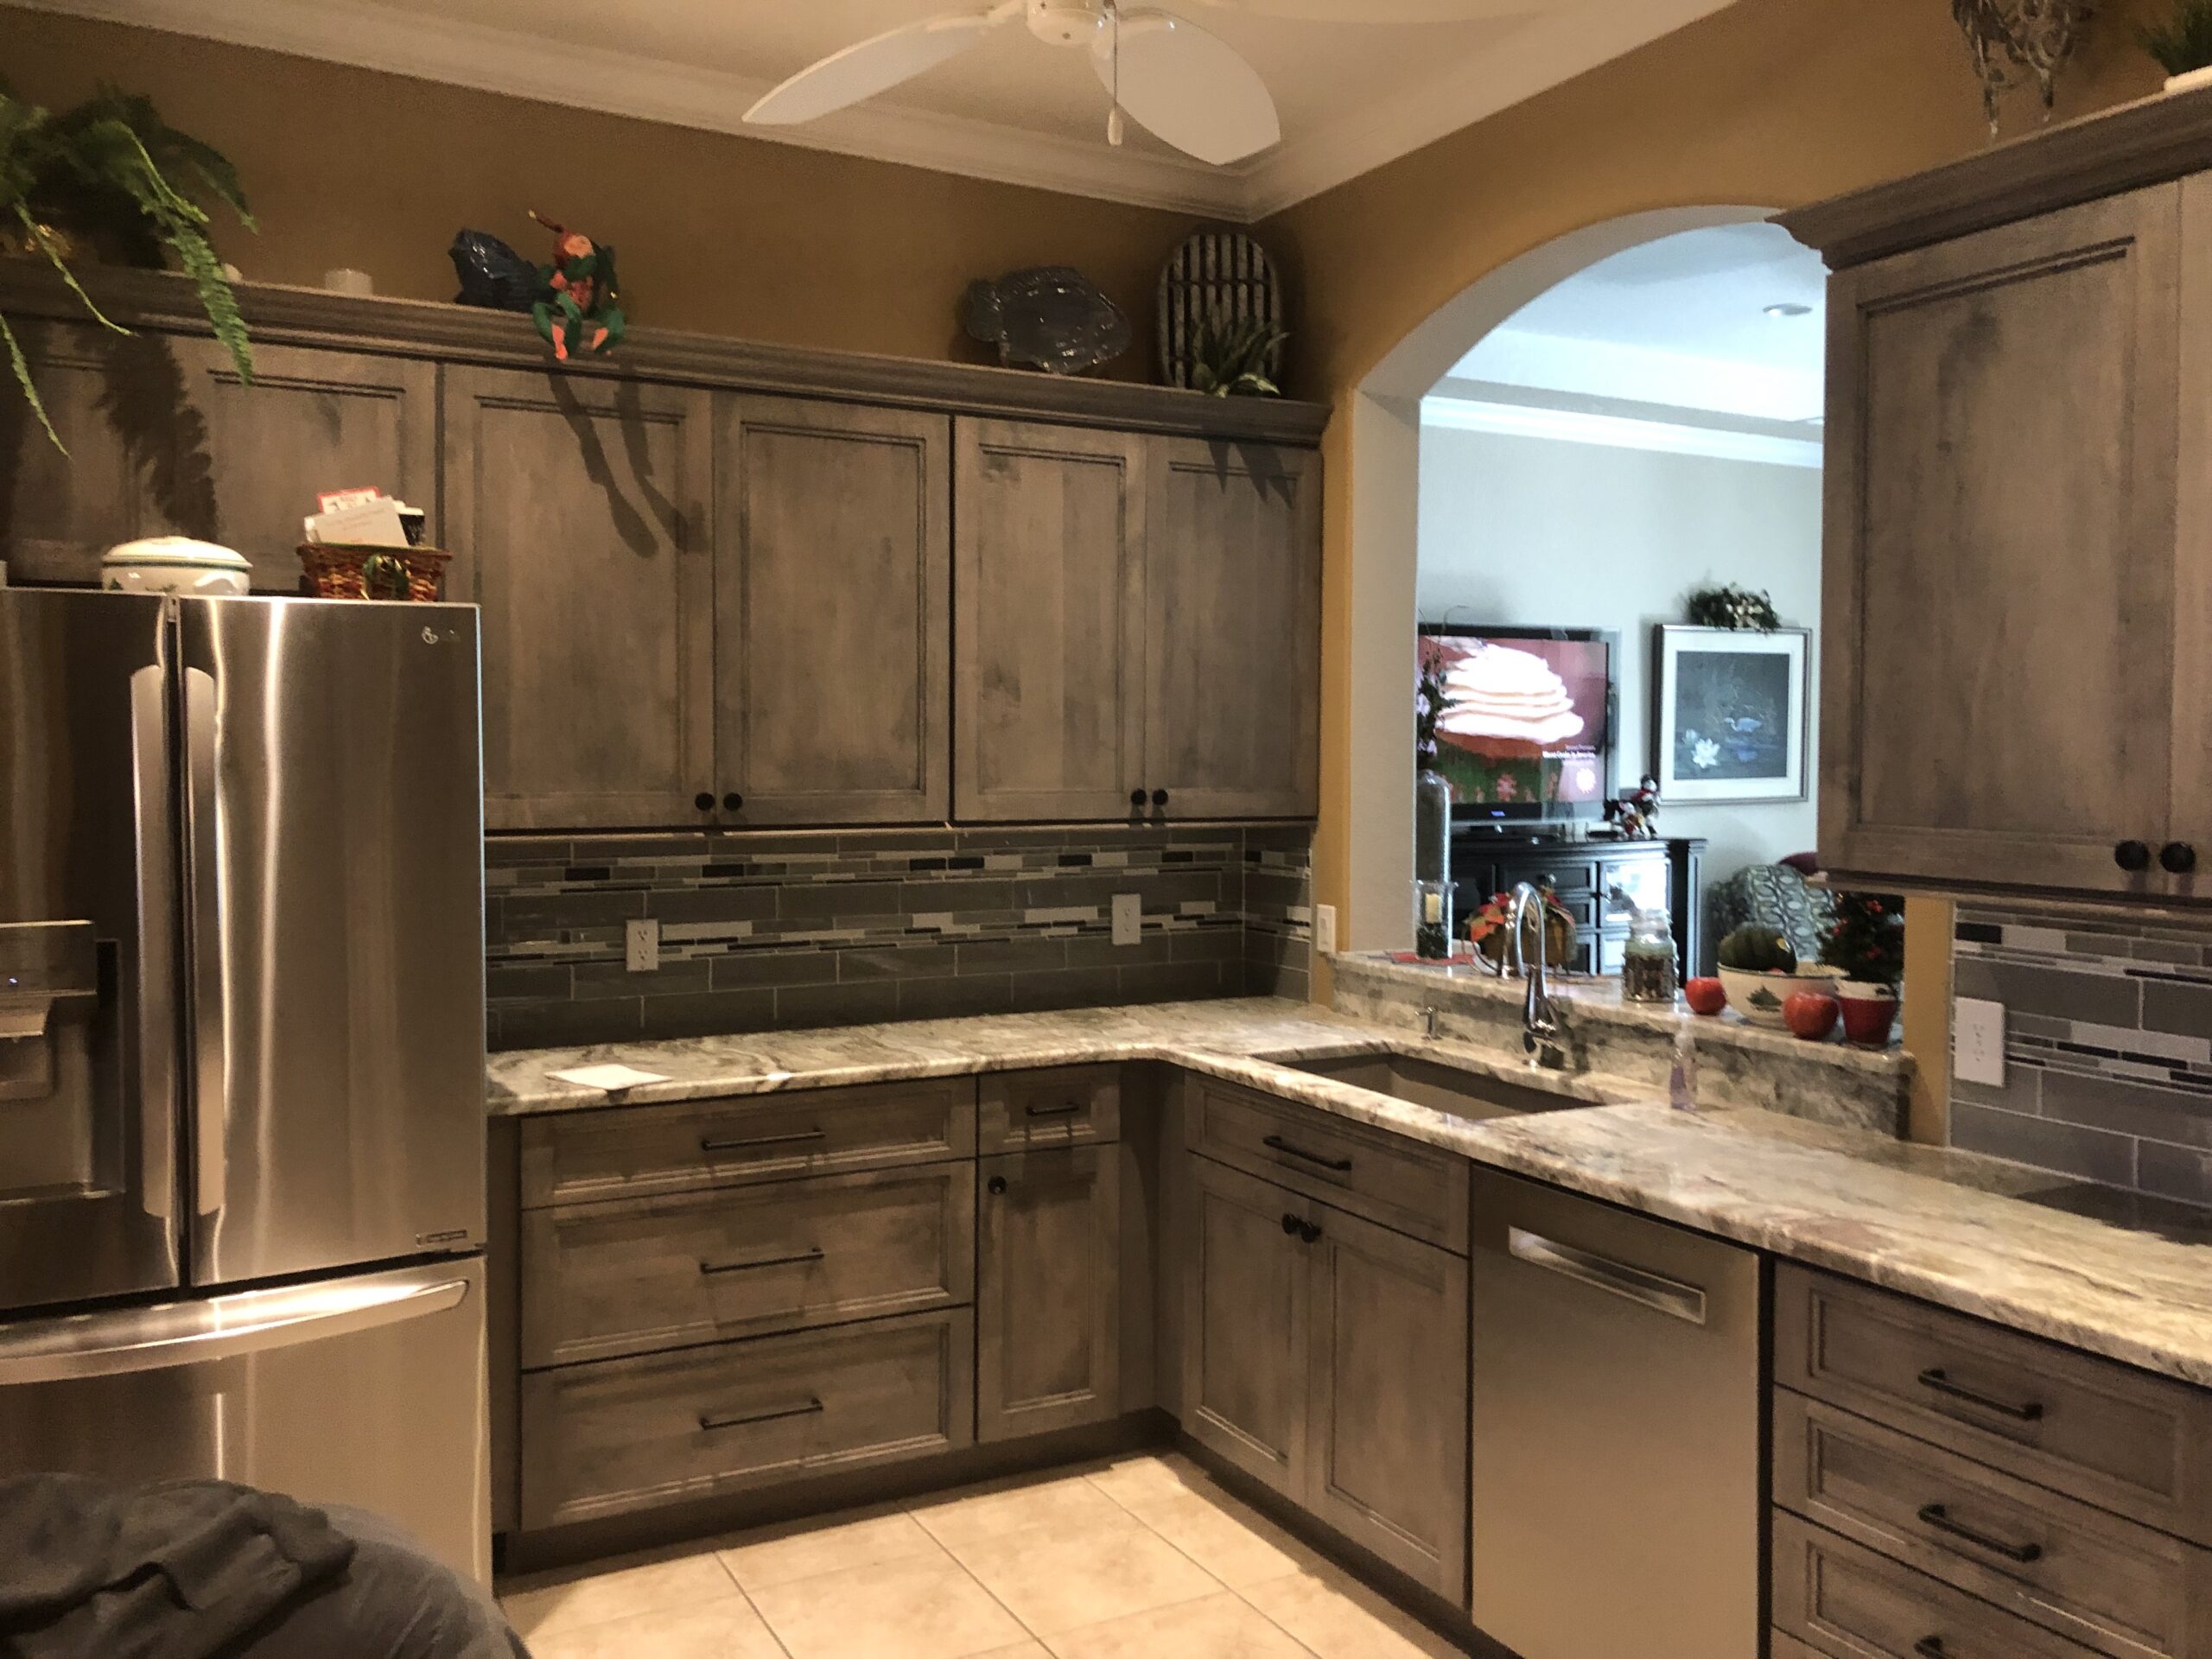 Modern, Stylish, and High Quality Stained Cherry Kitchen Cabinet Refacing in Turkey Creek